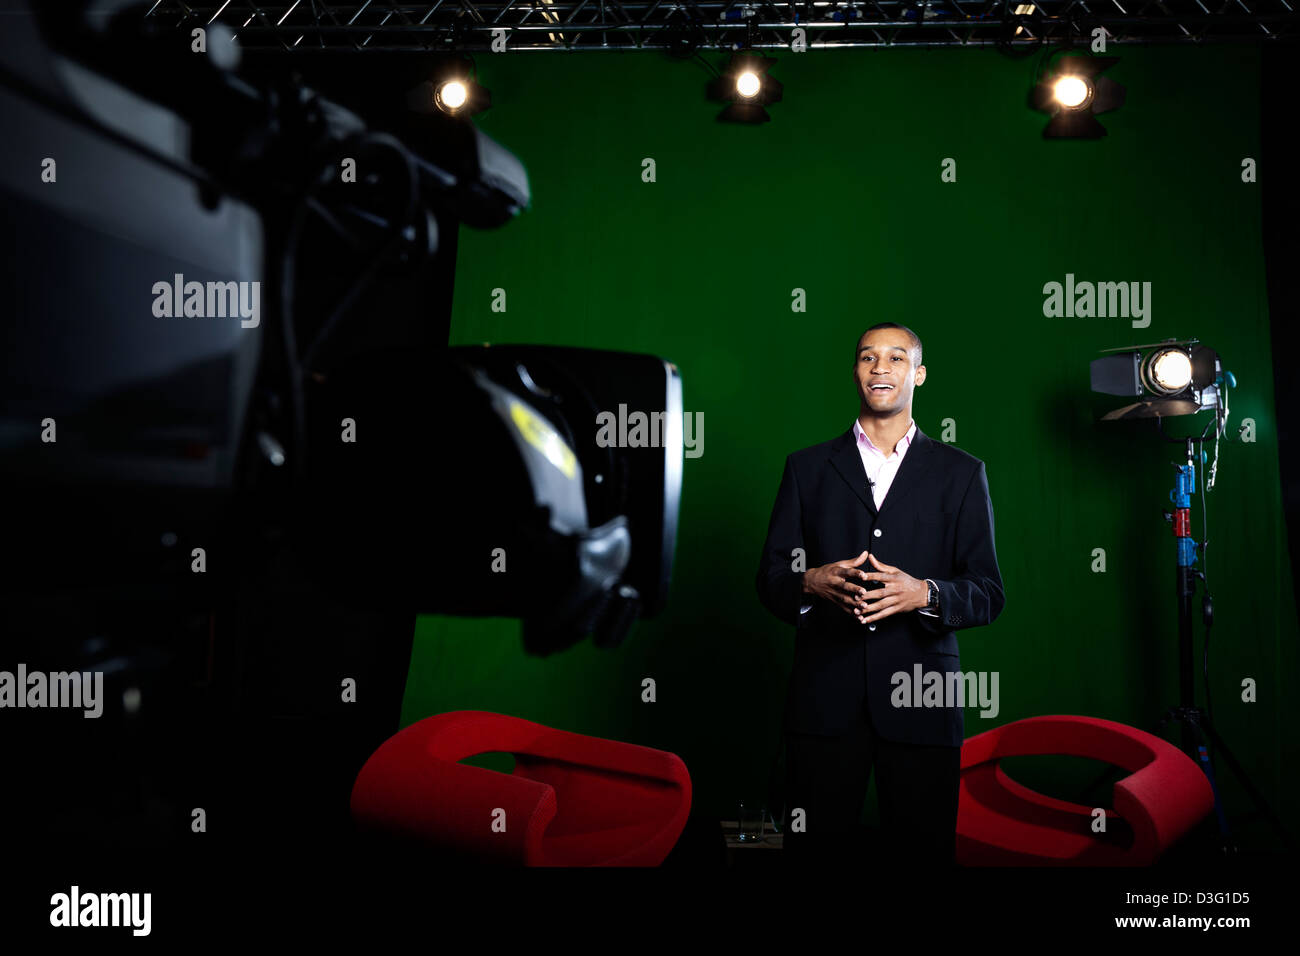 Television presenter in a green screen studio with television camera out of focus in the foreground. Stock Photo